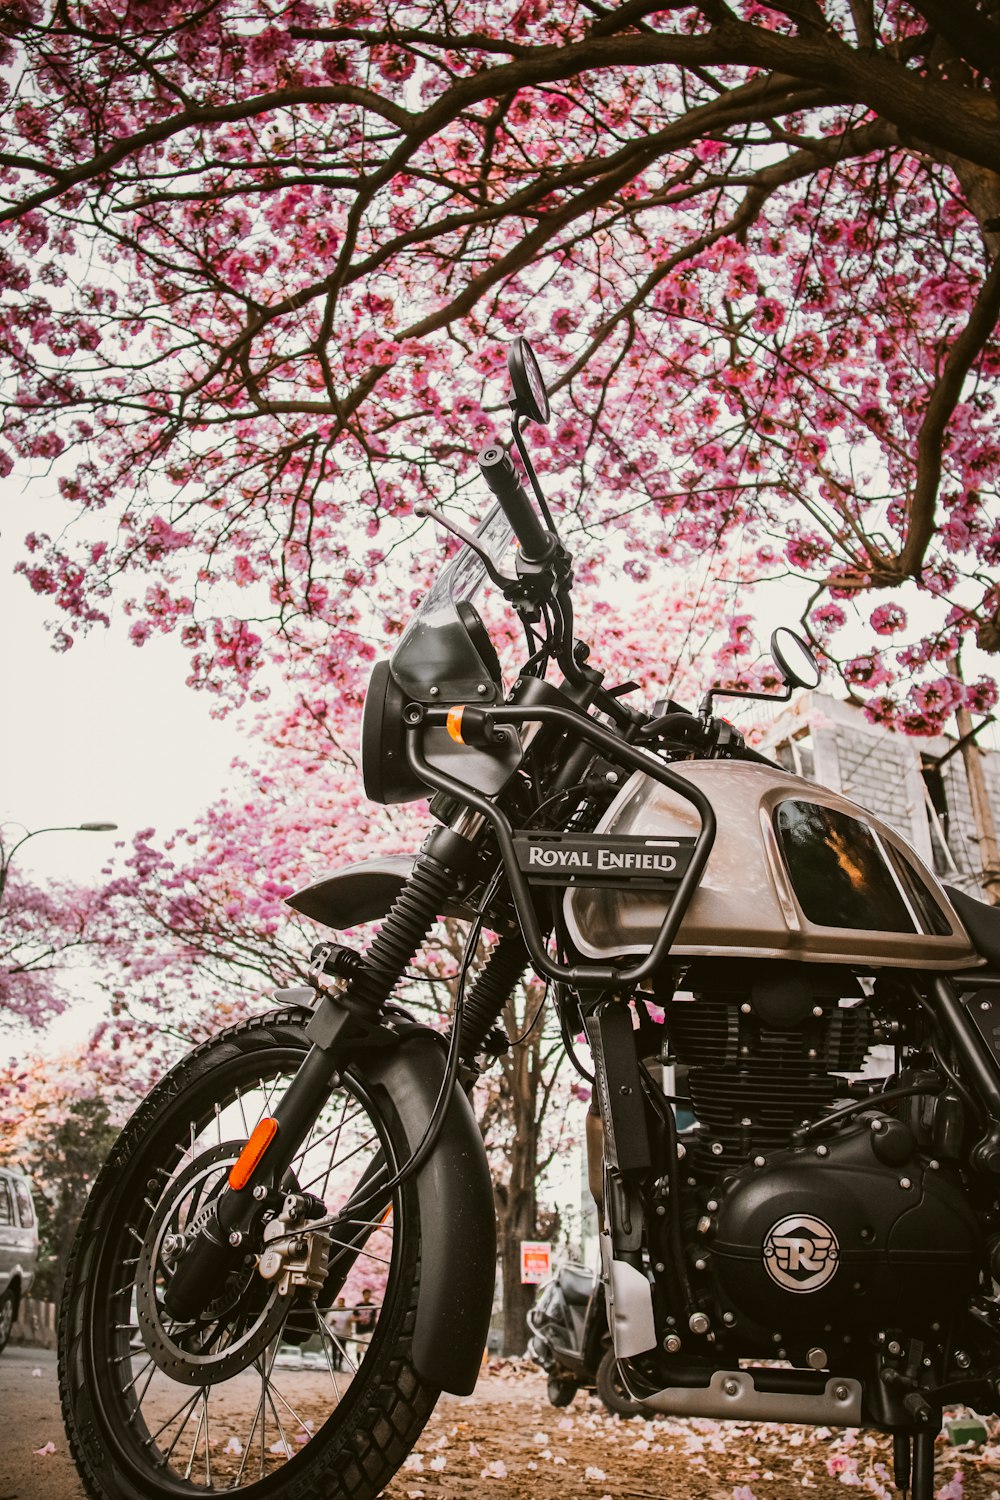 a motorcycle parked under a tree with pink flowers